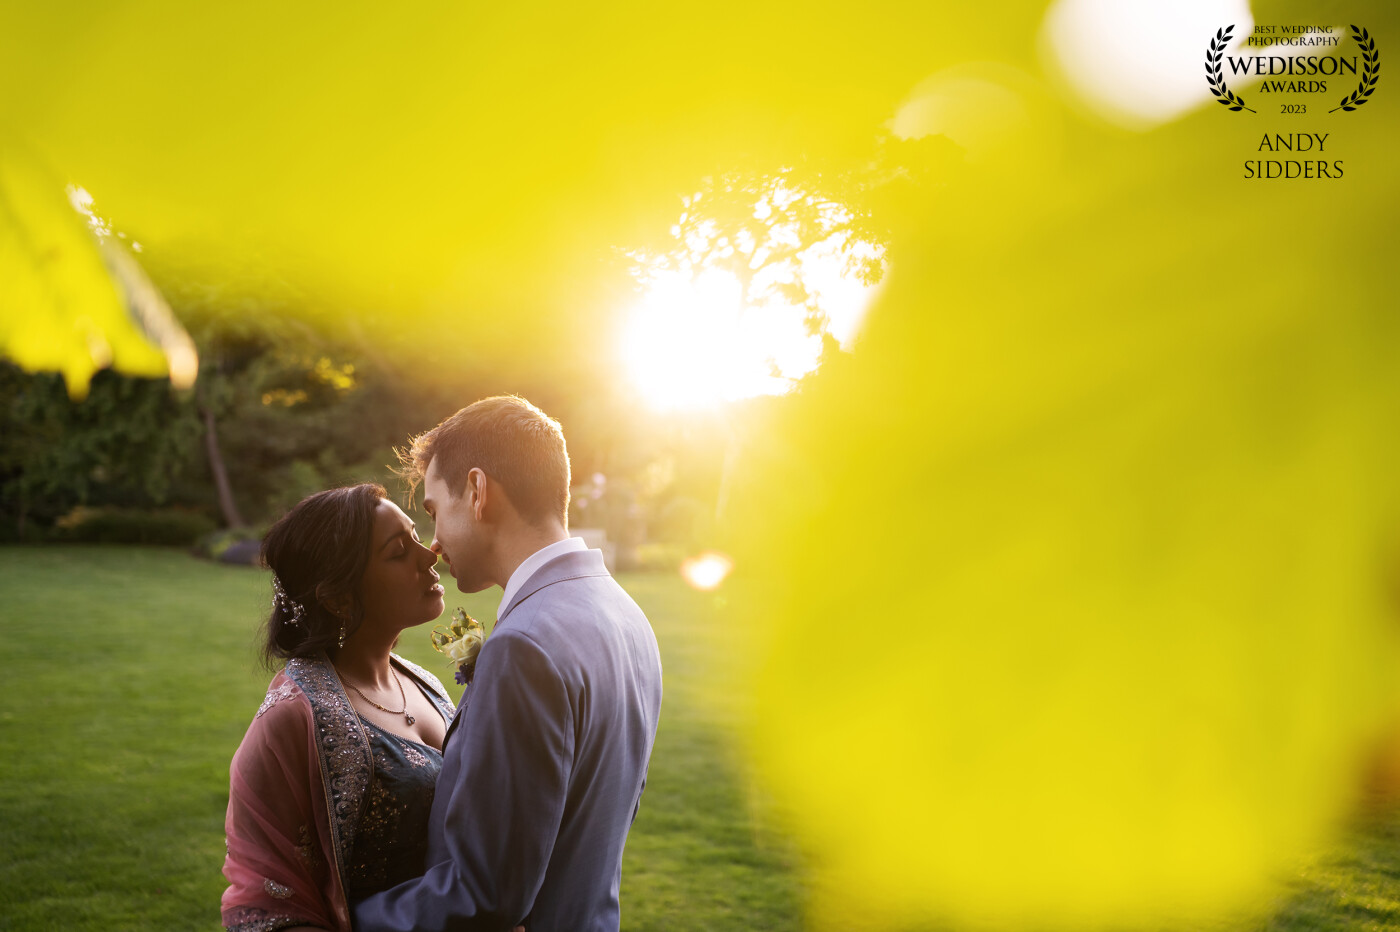 This romantic shot was captured at The Barns at Redcoats in Hertfordshire, UK. The couple were backlit by the golden hour sun and I shot through leaves to create the yellow/green-ish bokeh in the foreground.